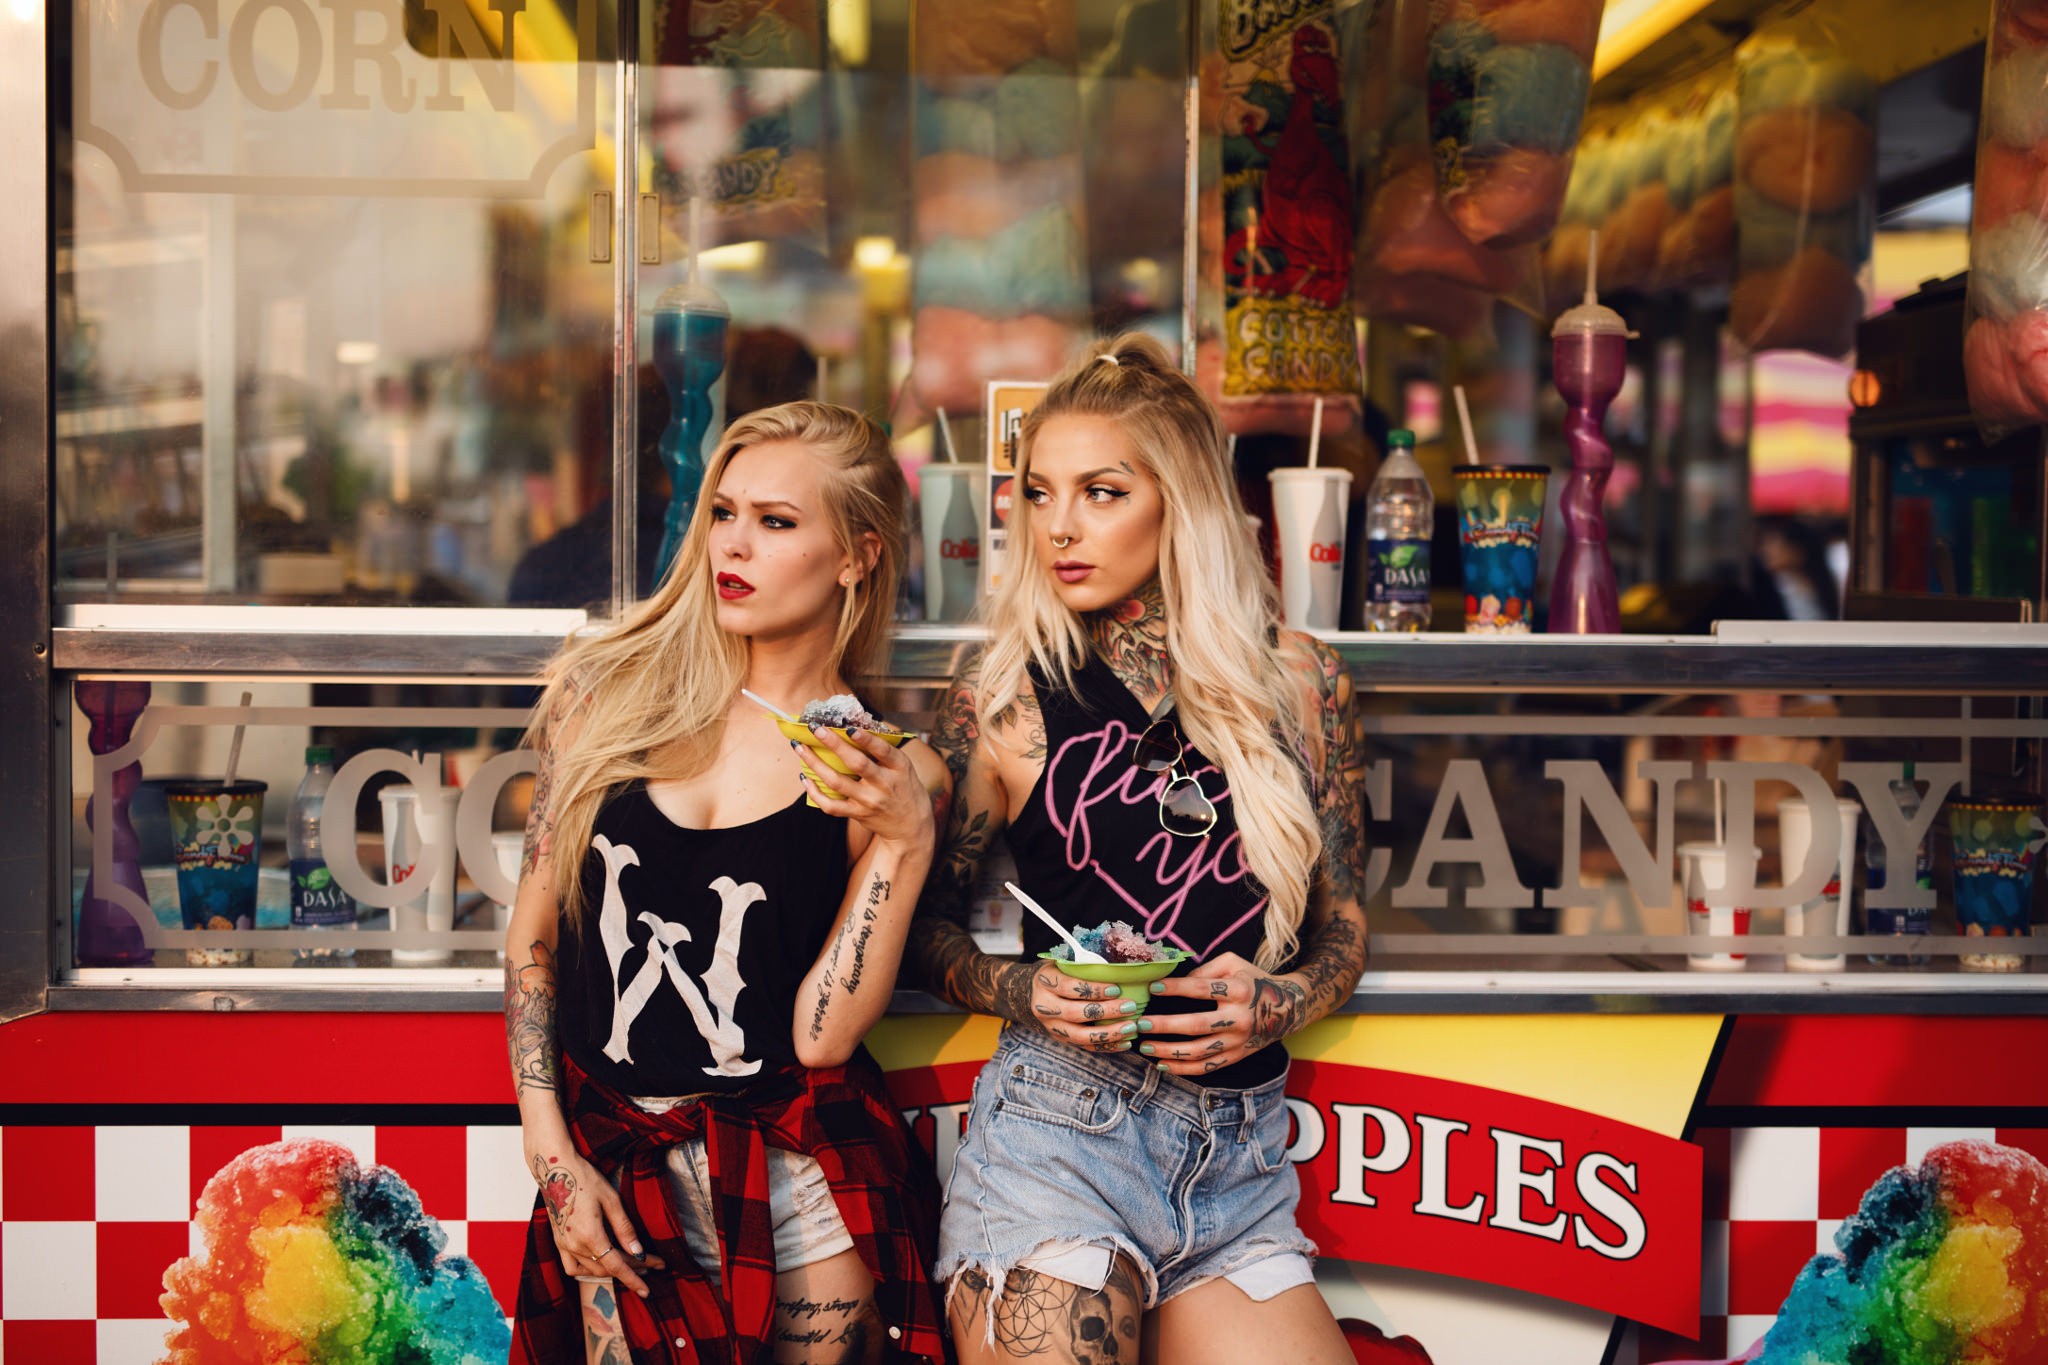 People 2048x1365 women blonde tattoo looking away jean shorts open mouth red lipstick painted nails ice cream two women inked girls food sweets standing nose ring makeup